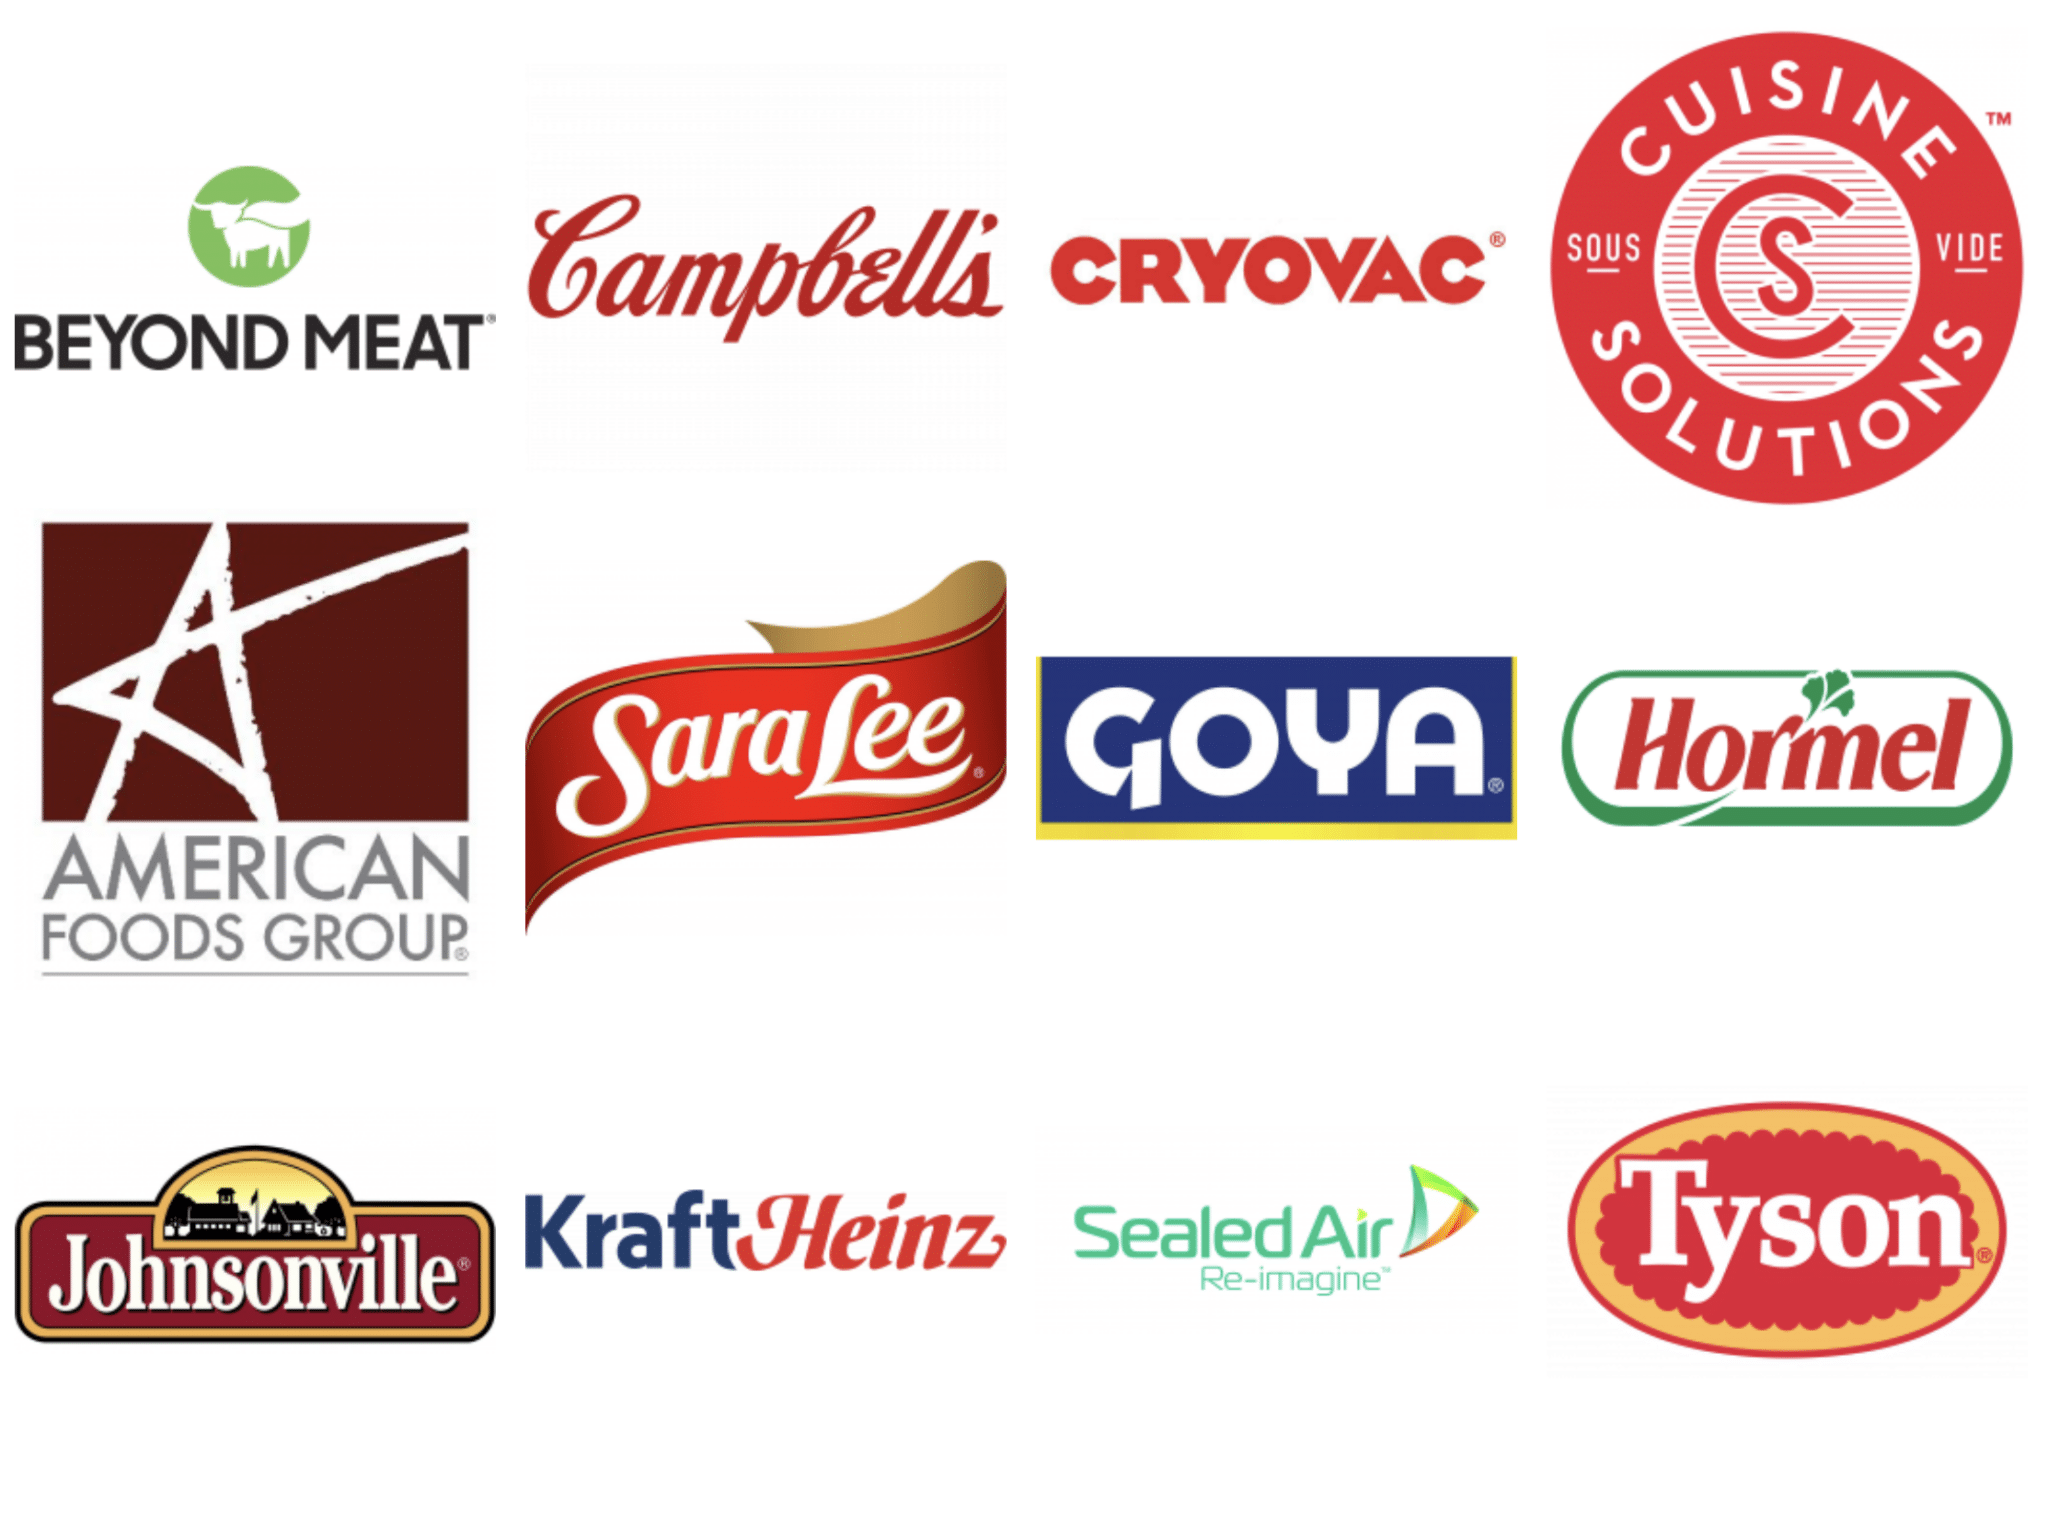 Various food company brand logos like Sara Lee, Campbell's, Goya and Hormel in rows of four.